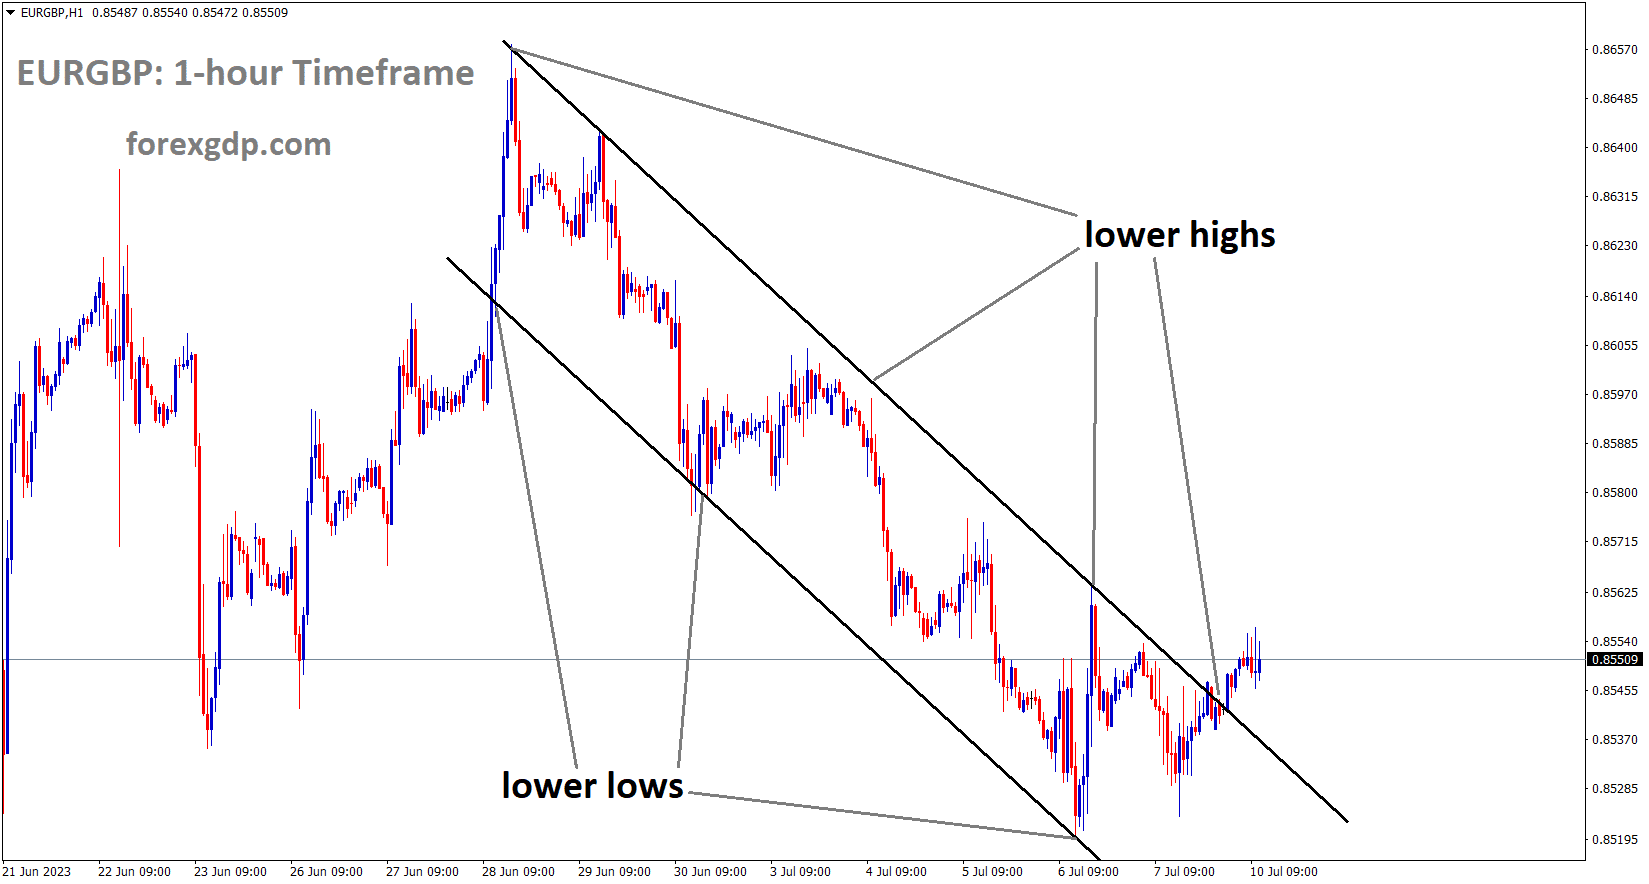 EURGBP is moving in the Descending channel and the market has reached the lower high area of the channel